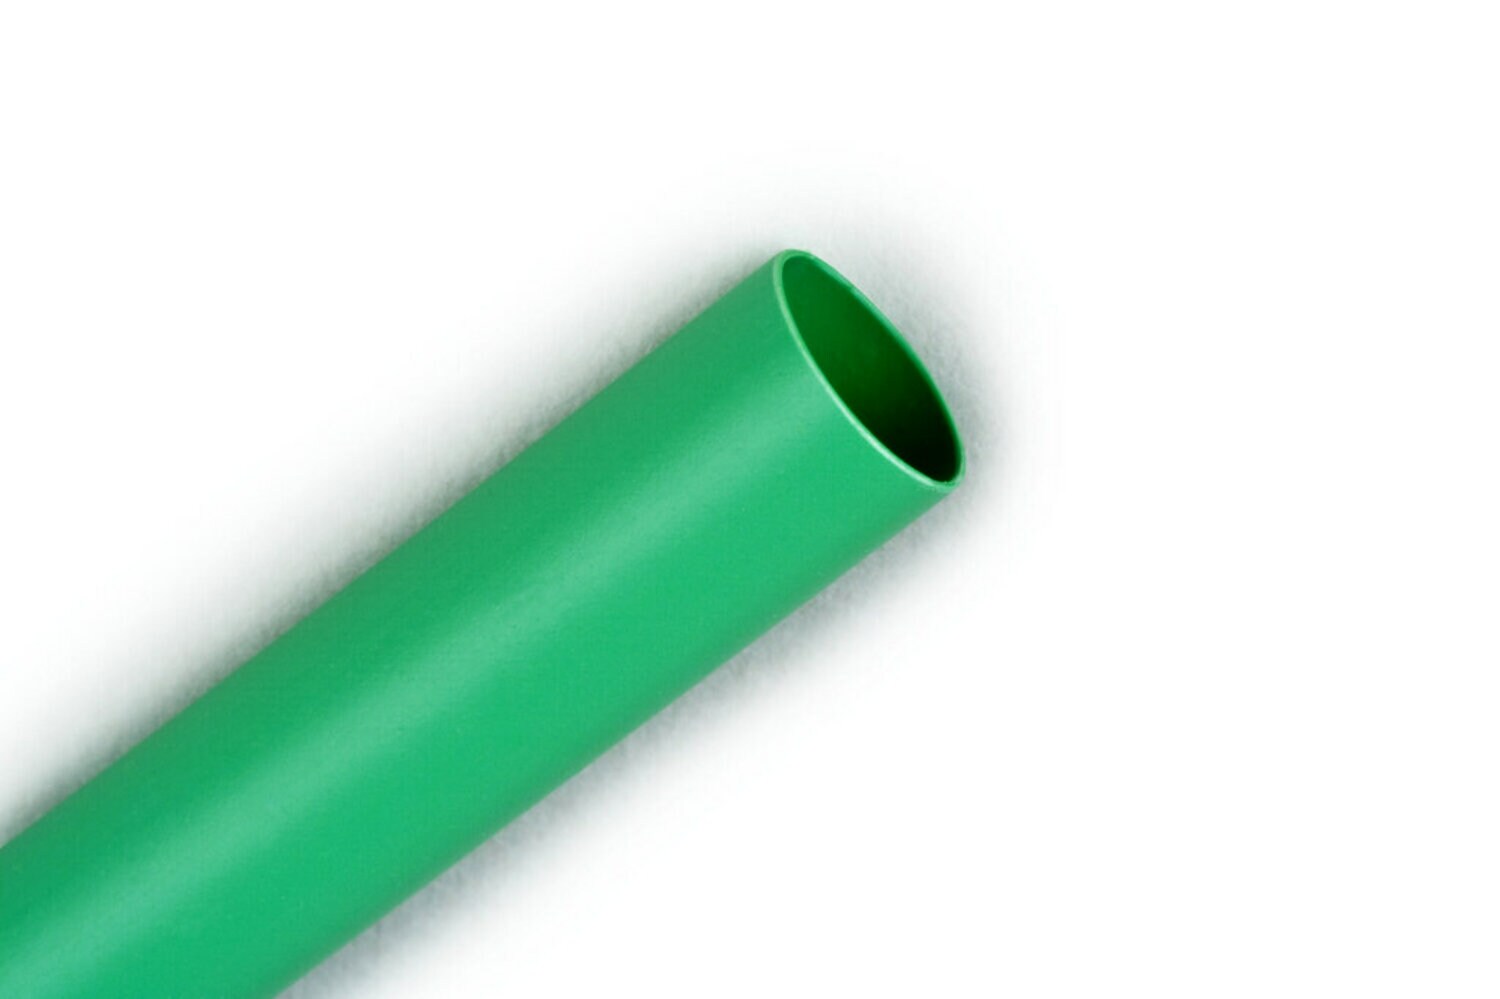 7010400861 - 3M Heat Shrink Thin-Wall Tubing FP-301-3/16-48"-Green-250 Pcs, 48 in
Length sticks, 250 pieces/case